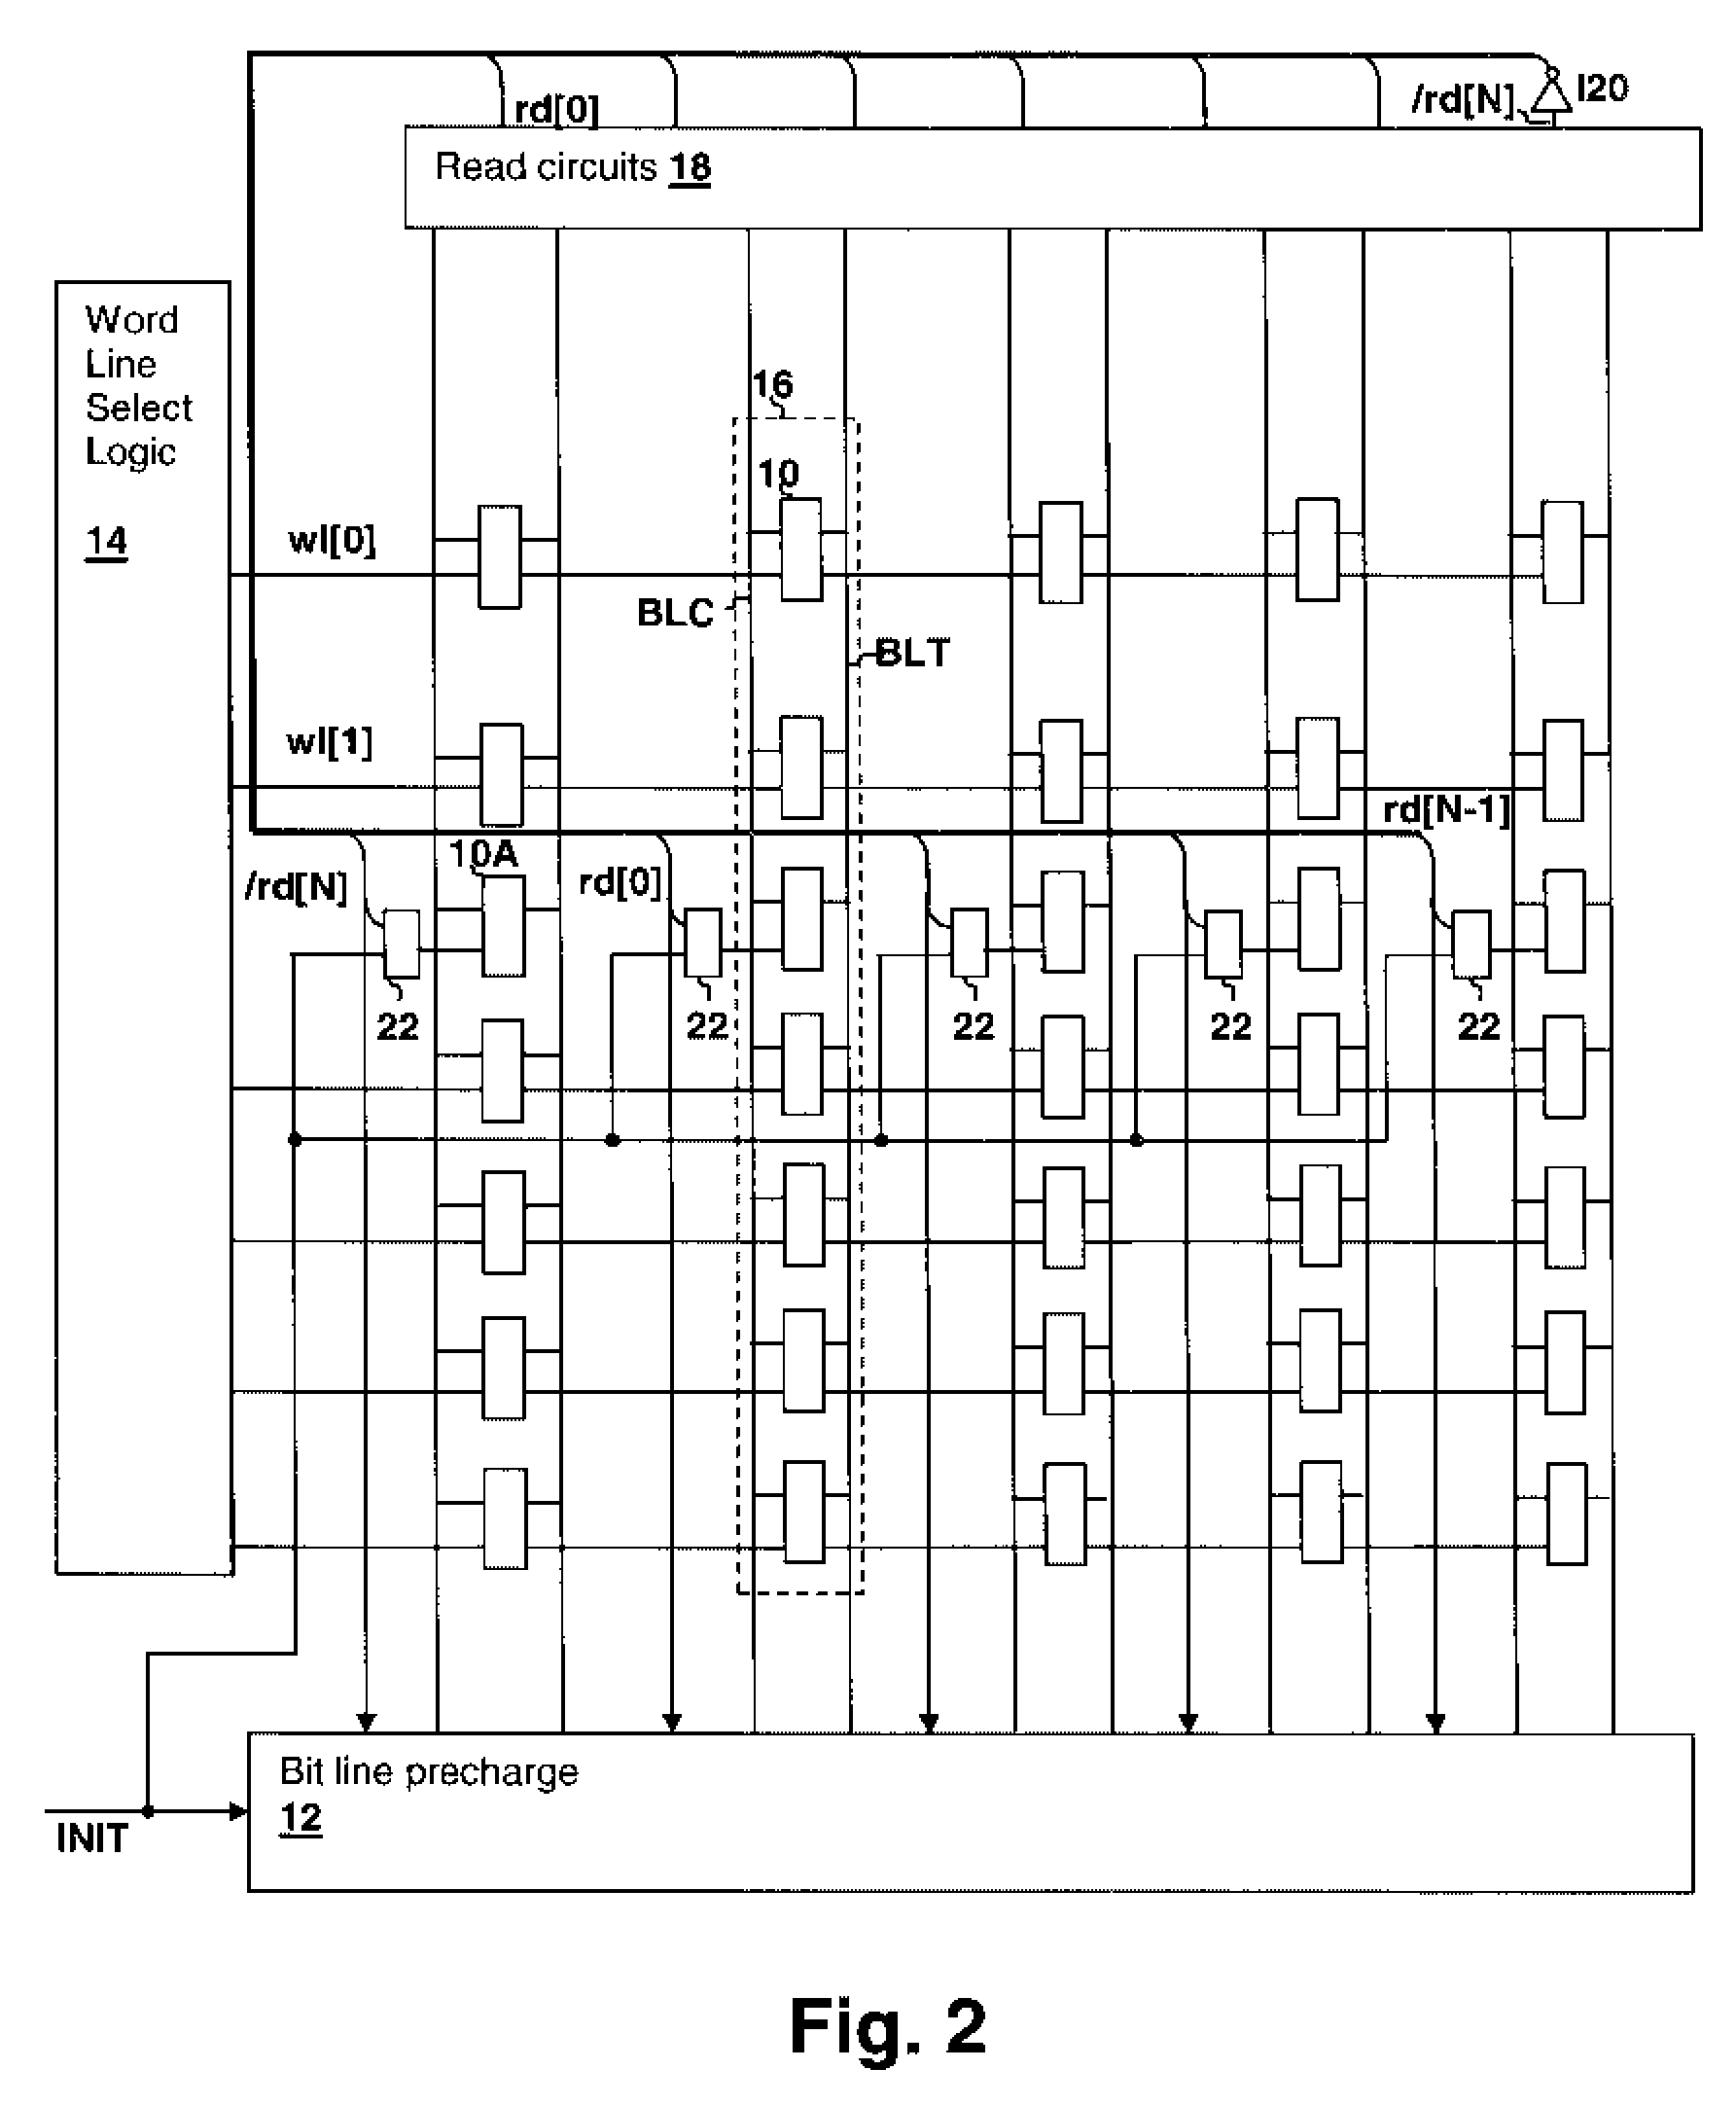 Wordline-To-Bitline Output Timing Ring Oscillator Circuit for Evaluating Storage Array Performance